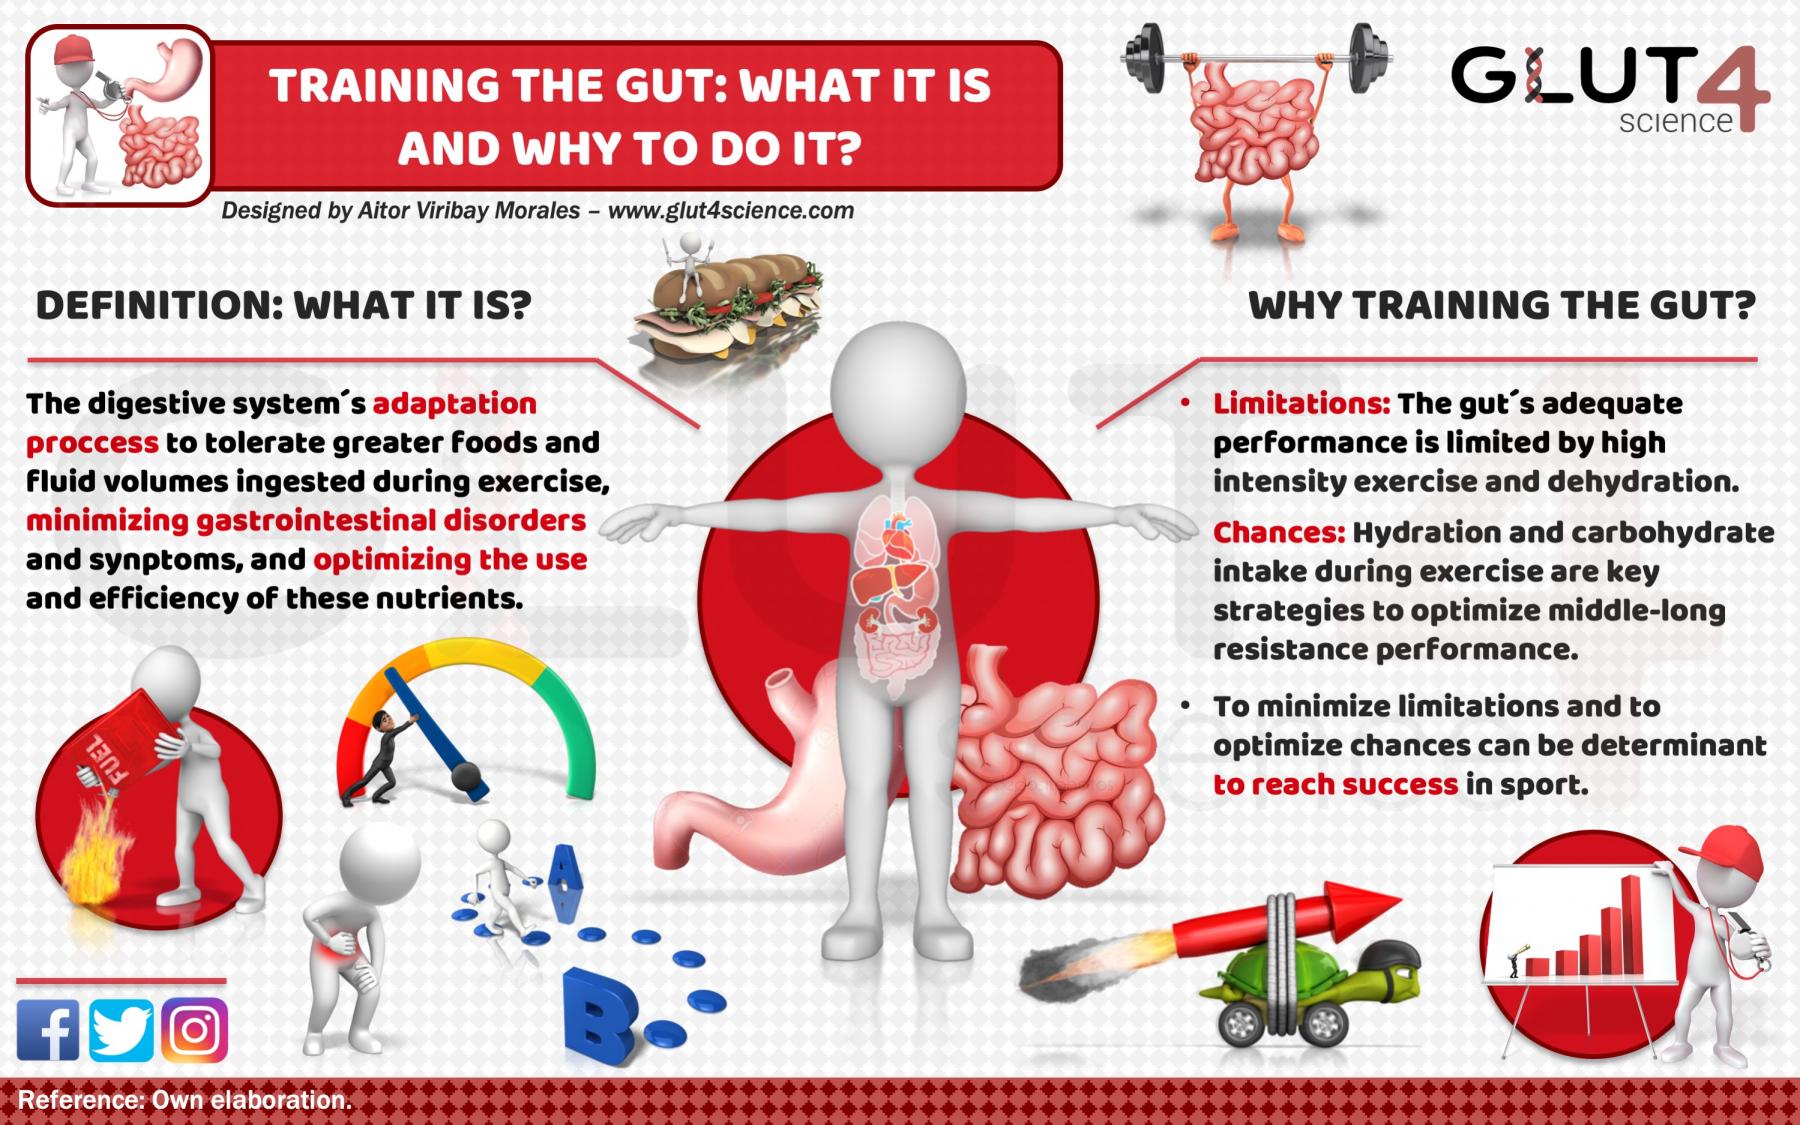 Training the gut - What it is?